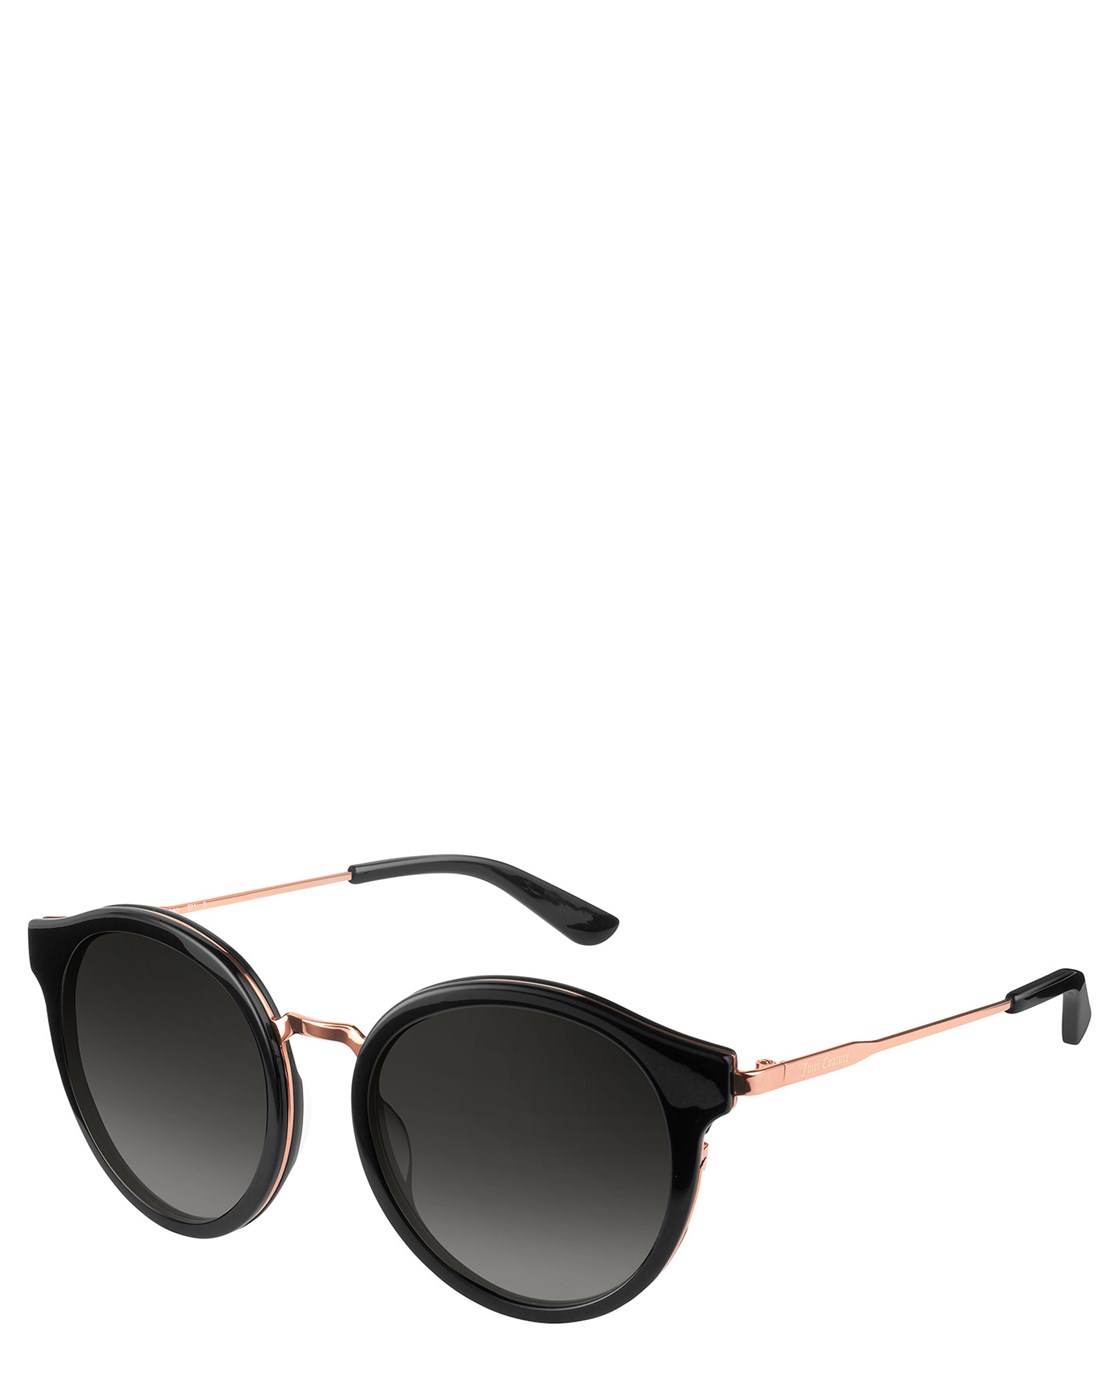 Juicy Couture HORN RIMMED SUNGLASSES